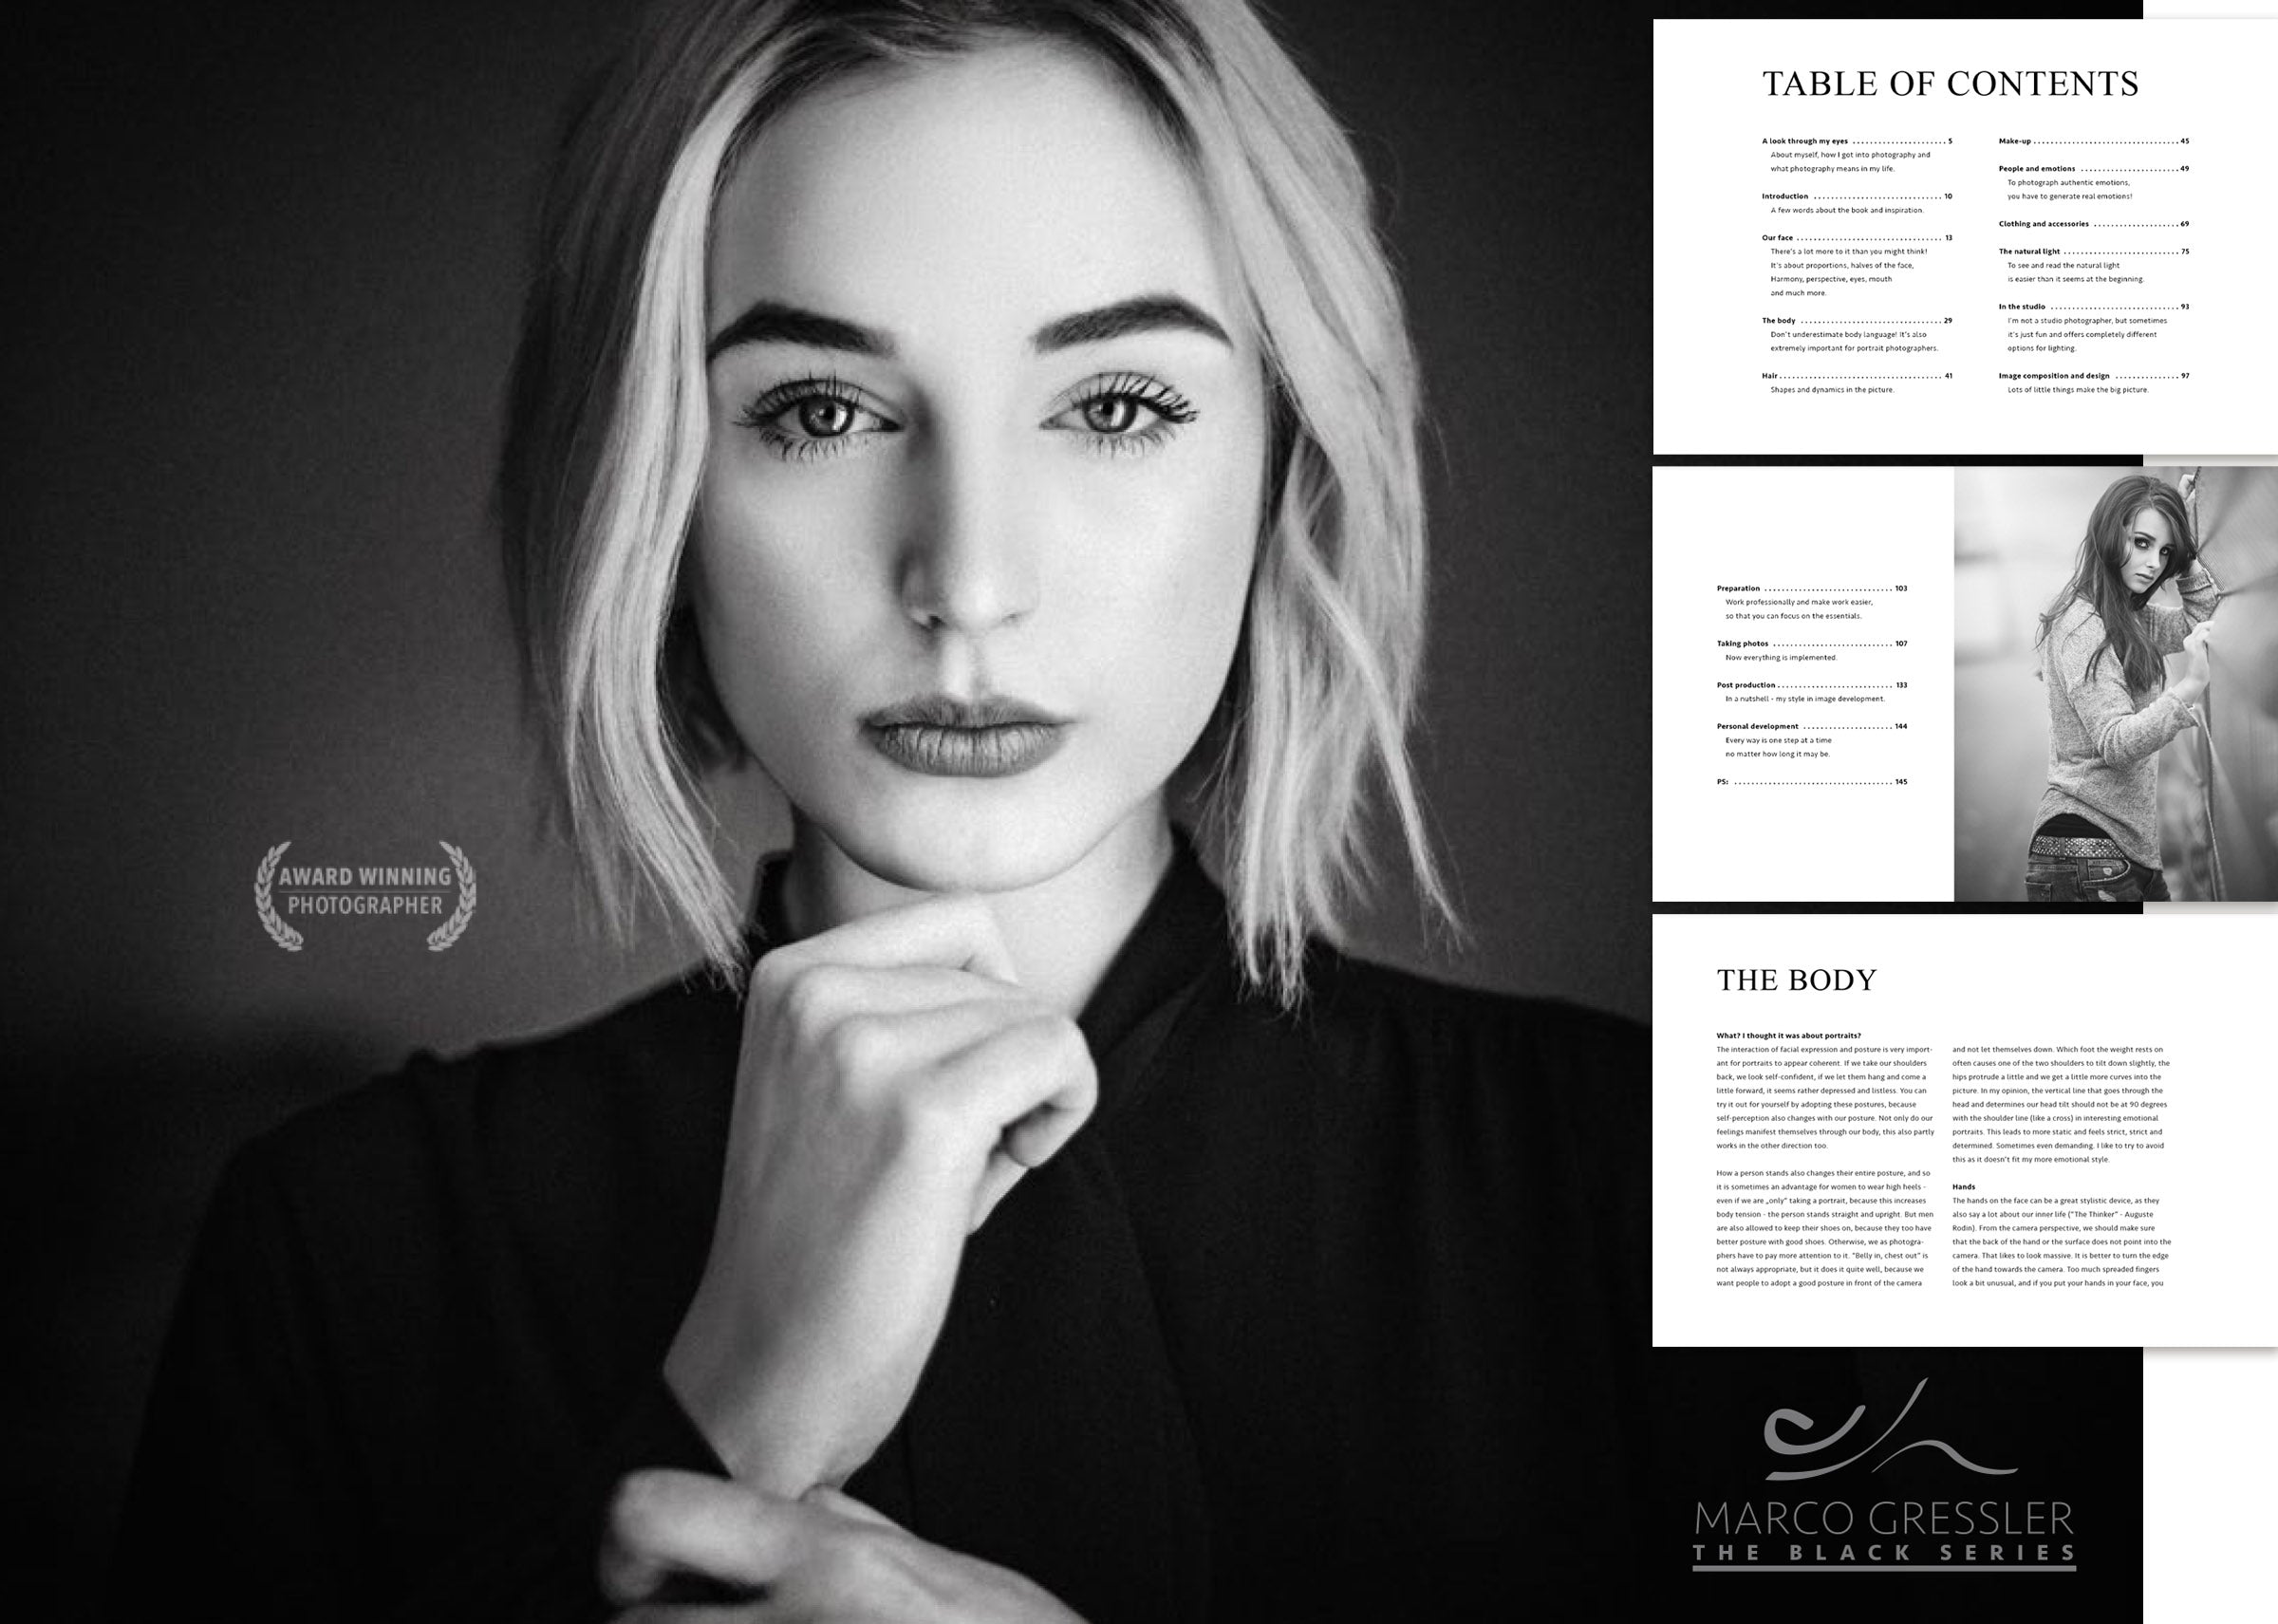 the ebook about portrait photography by Marco Gressler